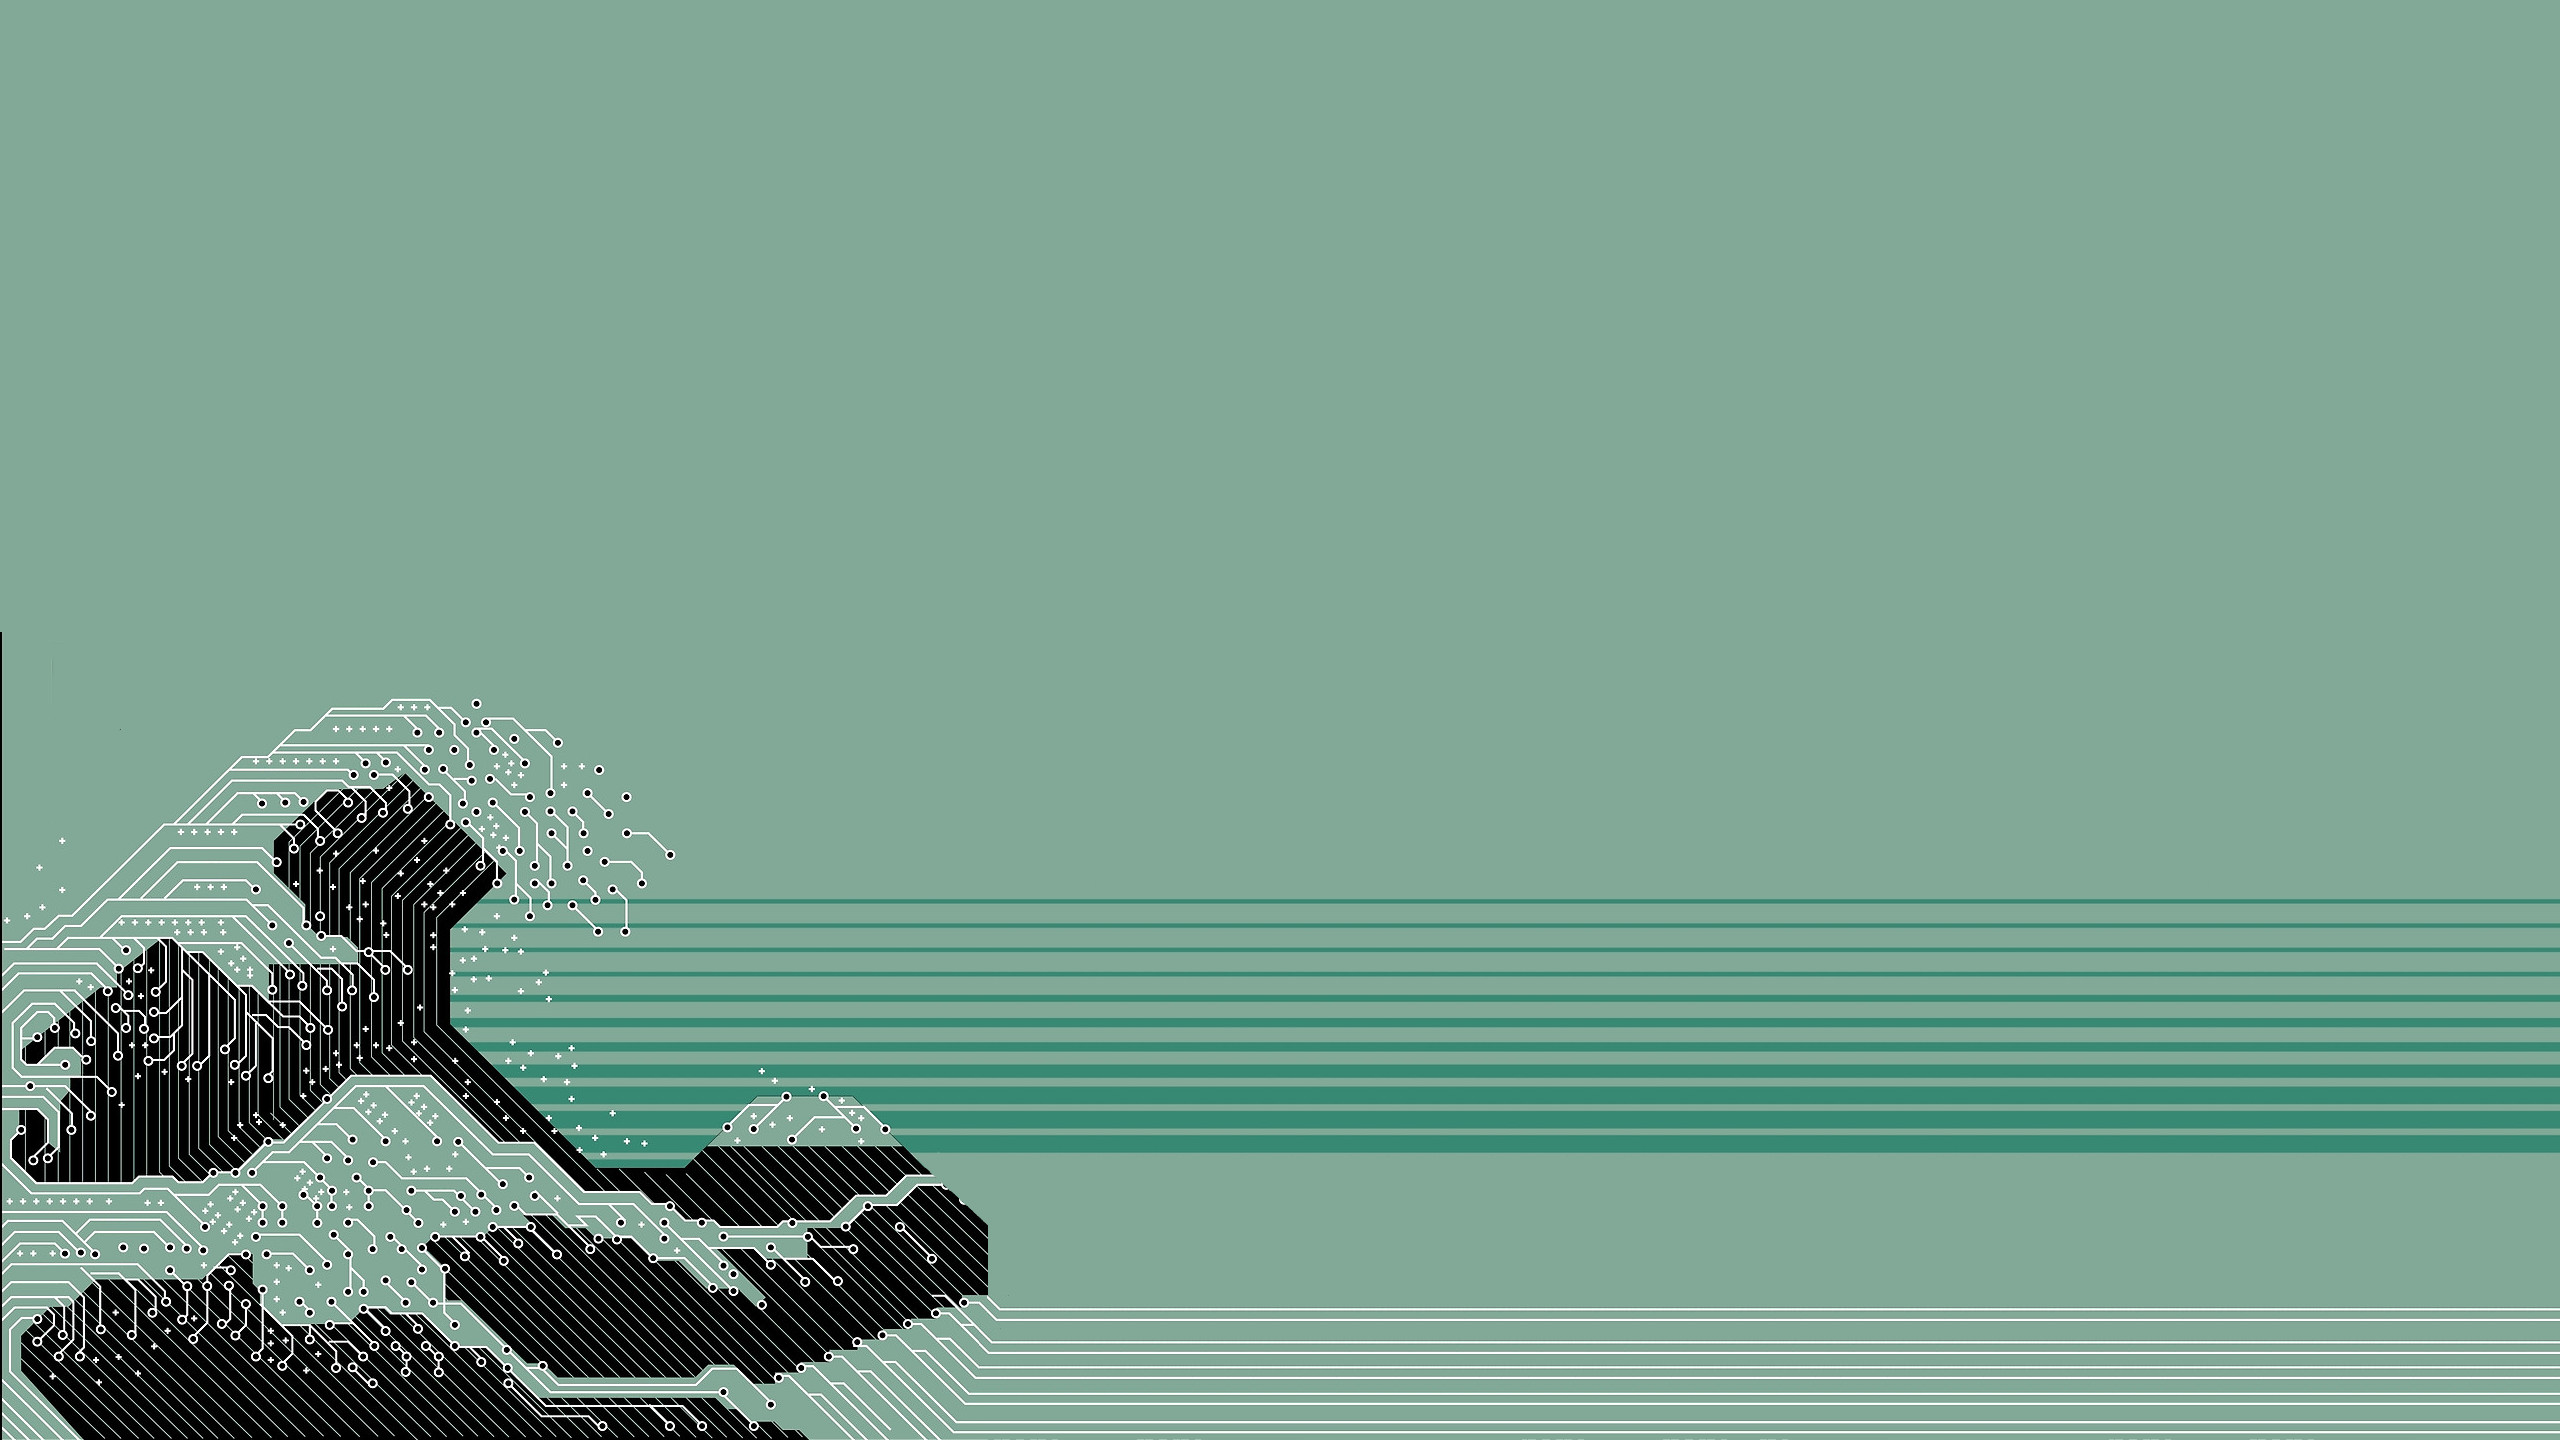 2560x1440 The Great Wave as a circuit board. 2560 Ã 1440 (i.redd.it)